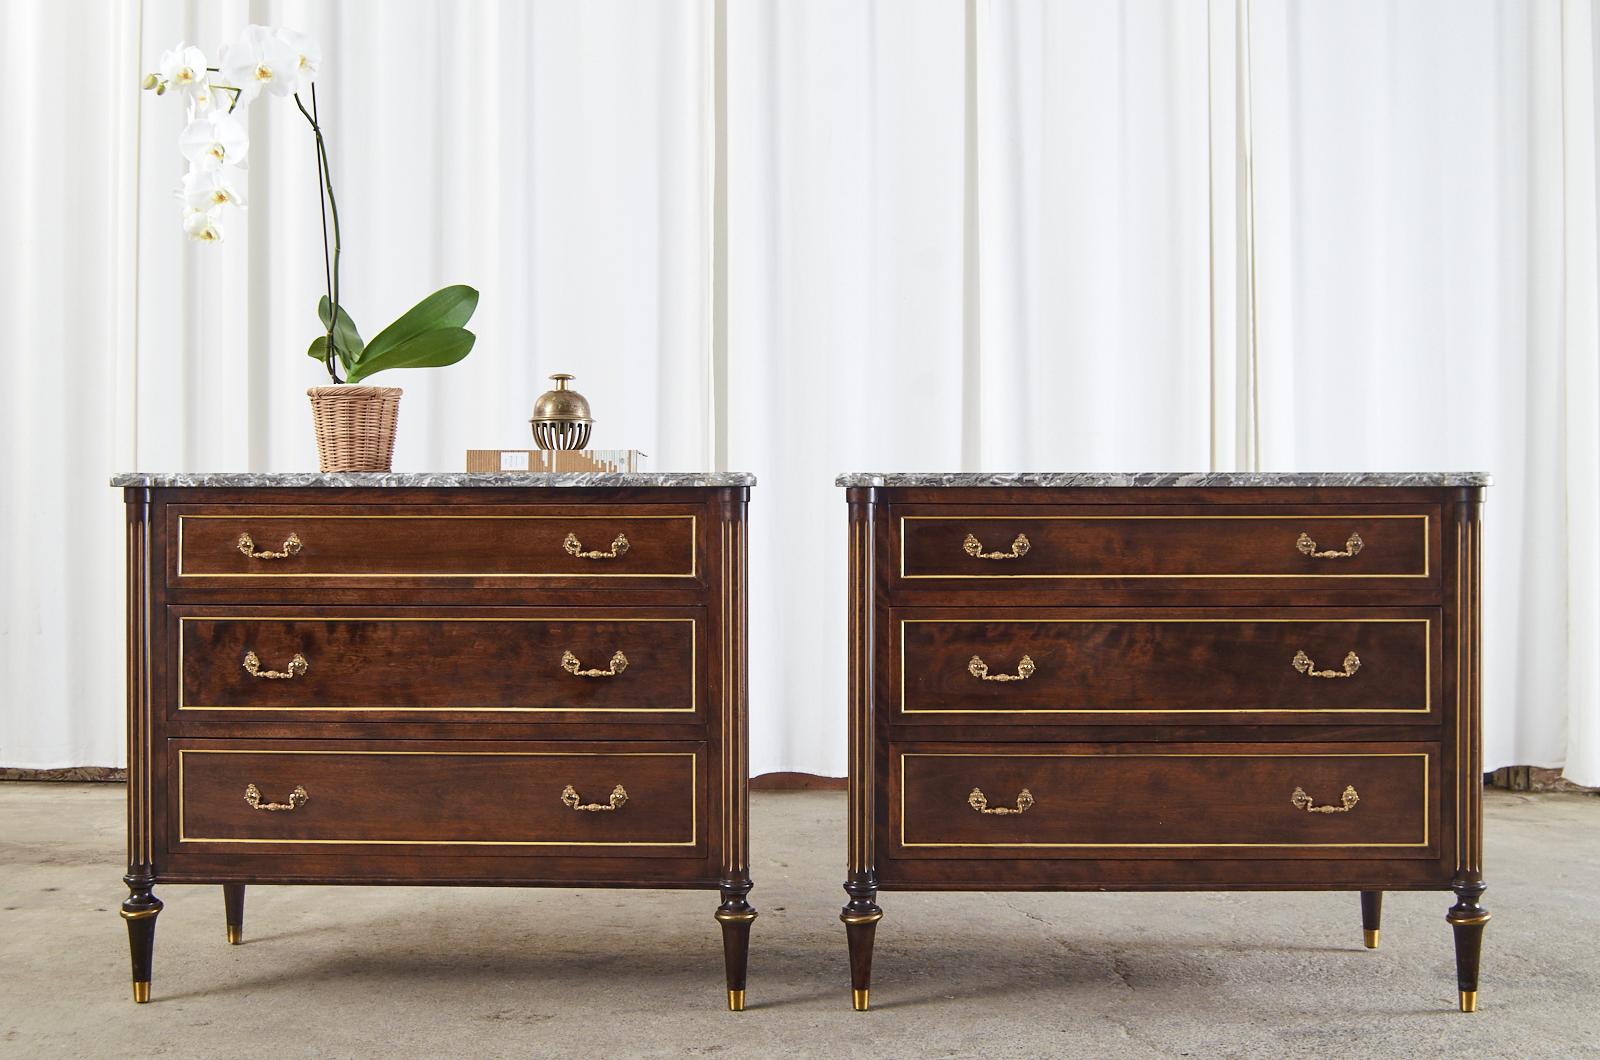 Opulent pair of French mahogany commodes or chest of drawers featuring dramatic variegated marble tops. The cases are crafted in the grand Louis XVI taste from radiant mahogany having bronze mounted borders on the three storage drawers and side